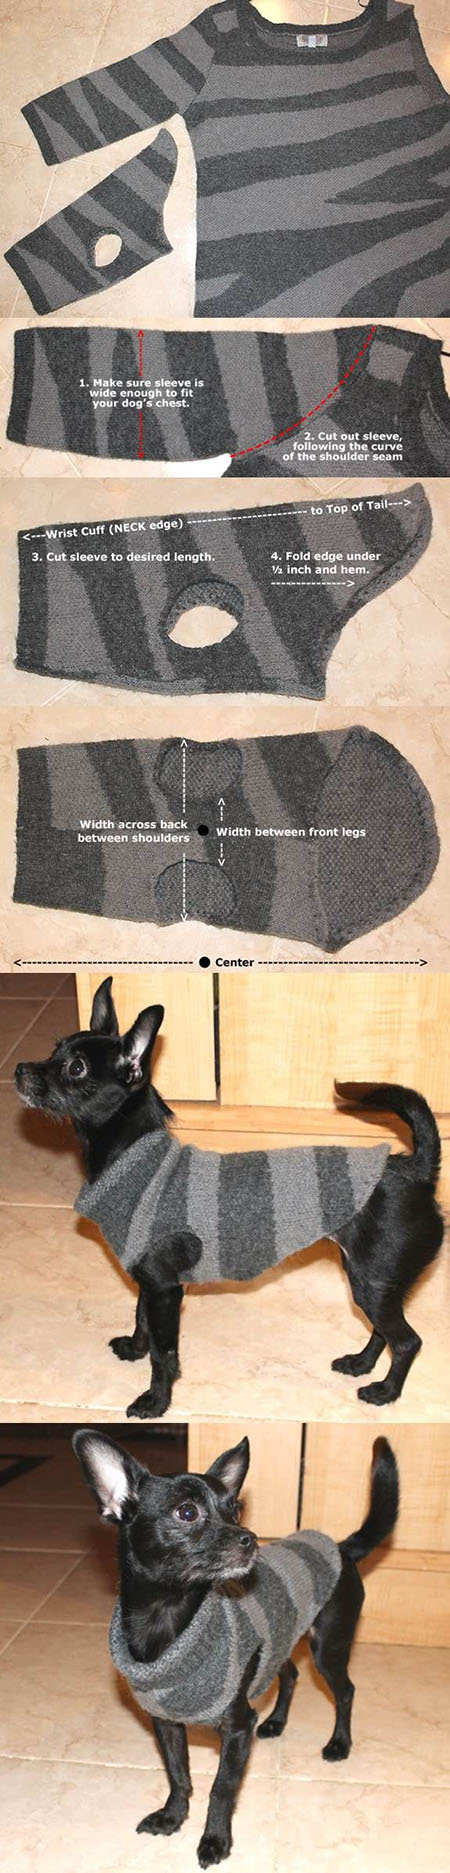 21 DIY Dog Sweater from a Used Sweater 494d048f8